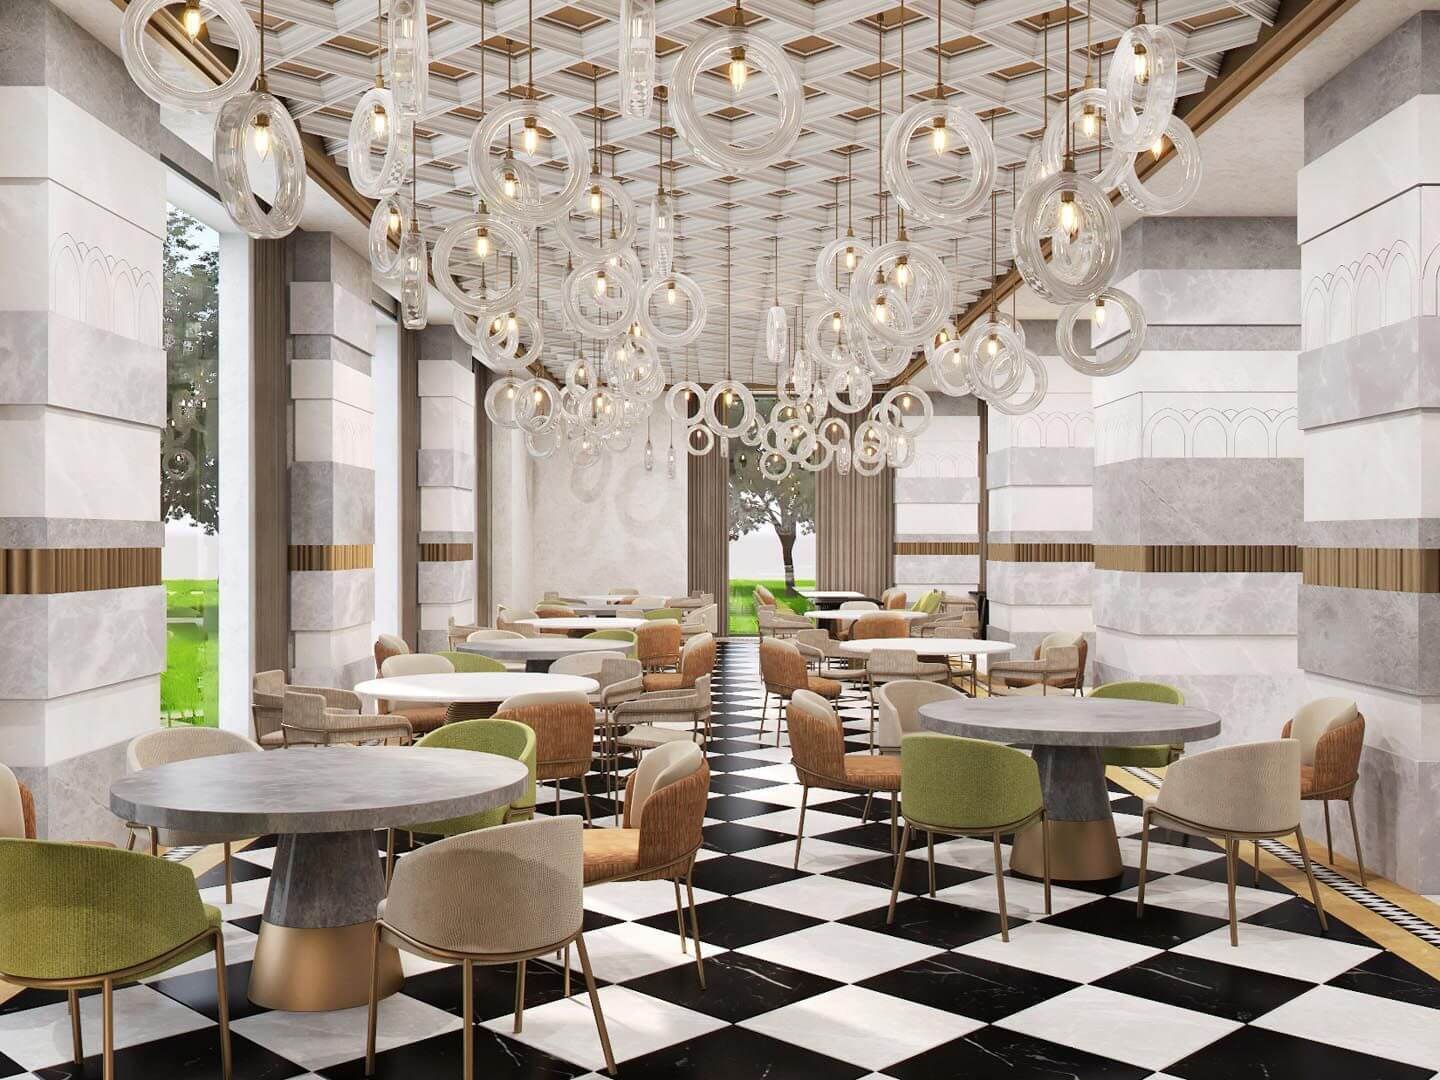 Restaurant at Cullinan Belek with black and white tiled floor, multi coloured seatsm, and grey tables